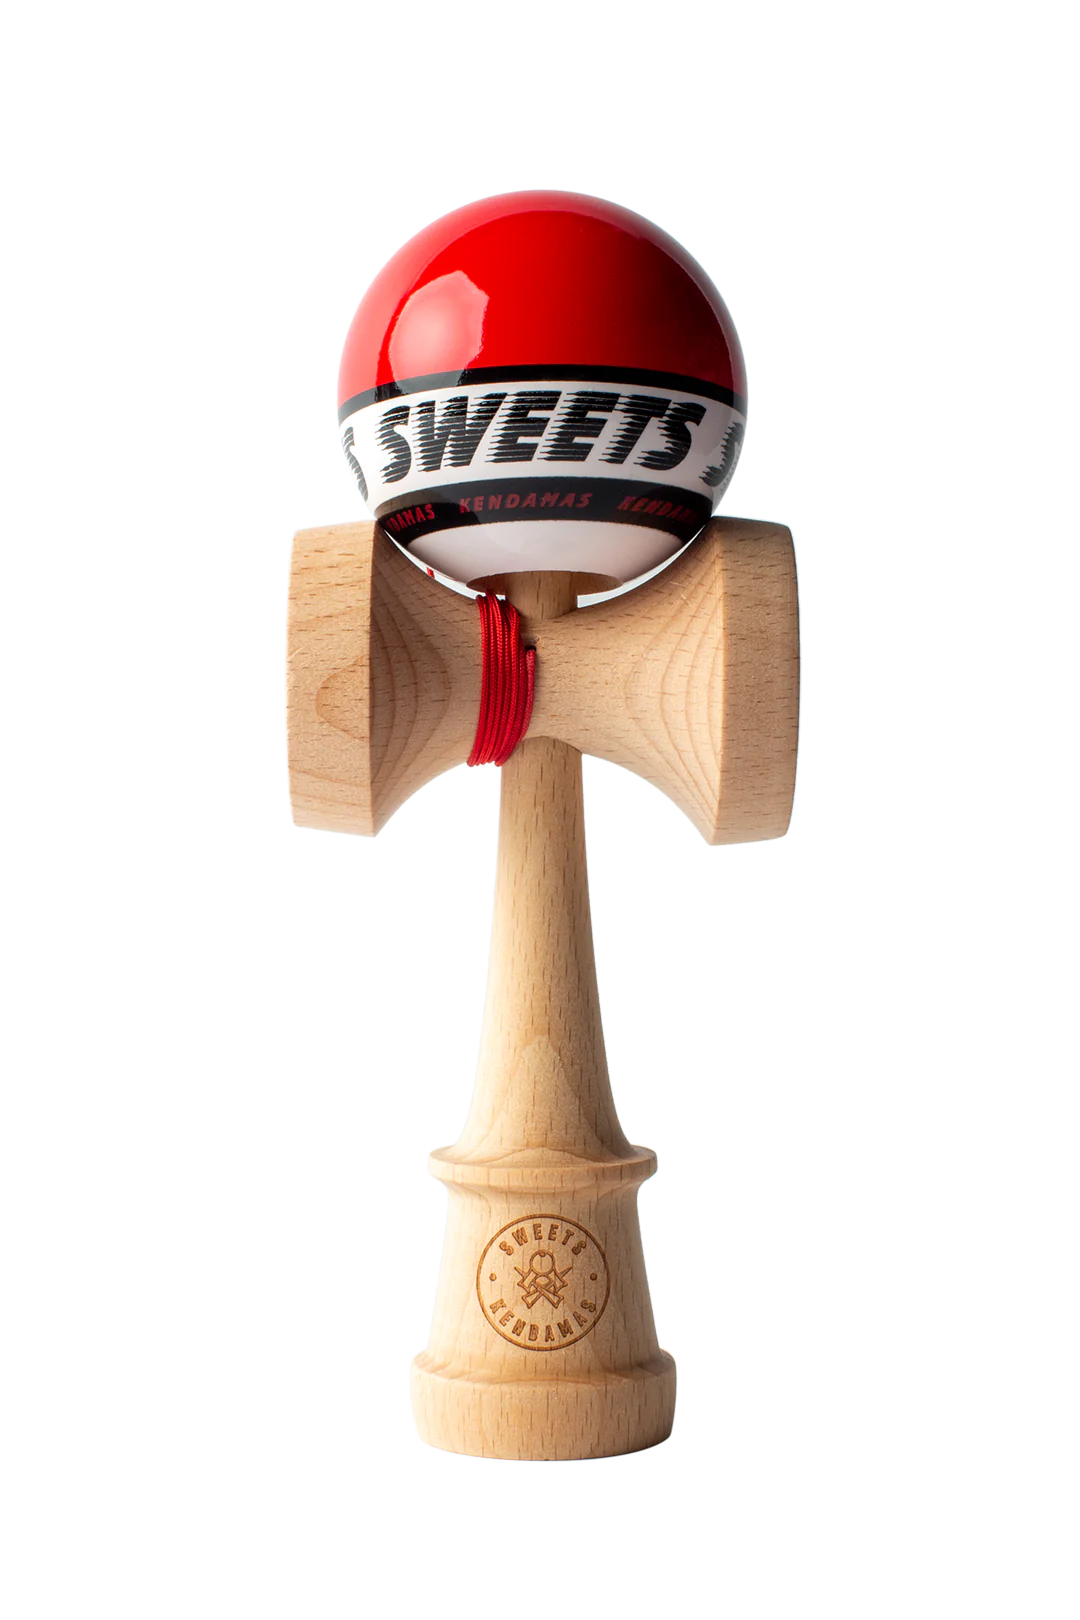 Sweets Kendamas - 
SWEETS STARTER - RED